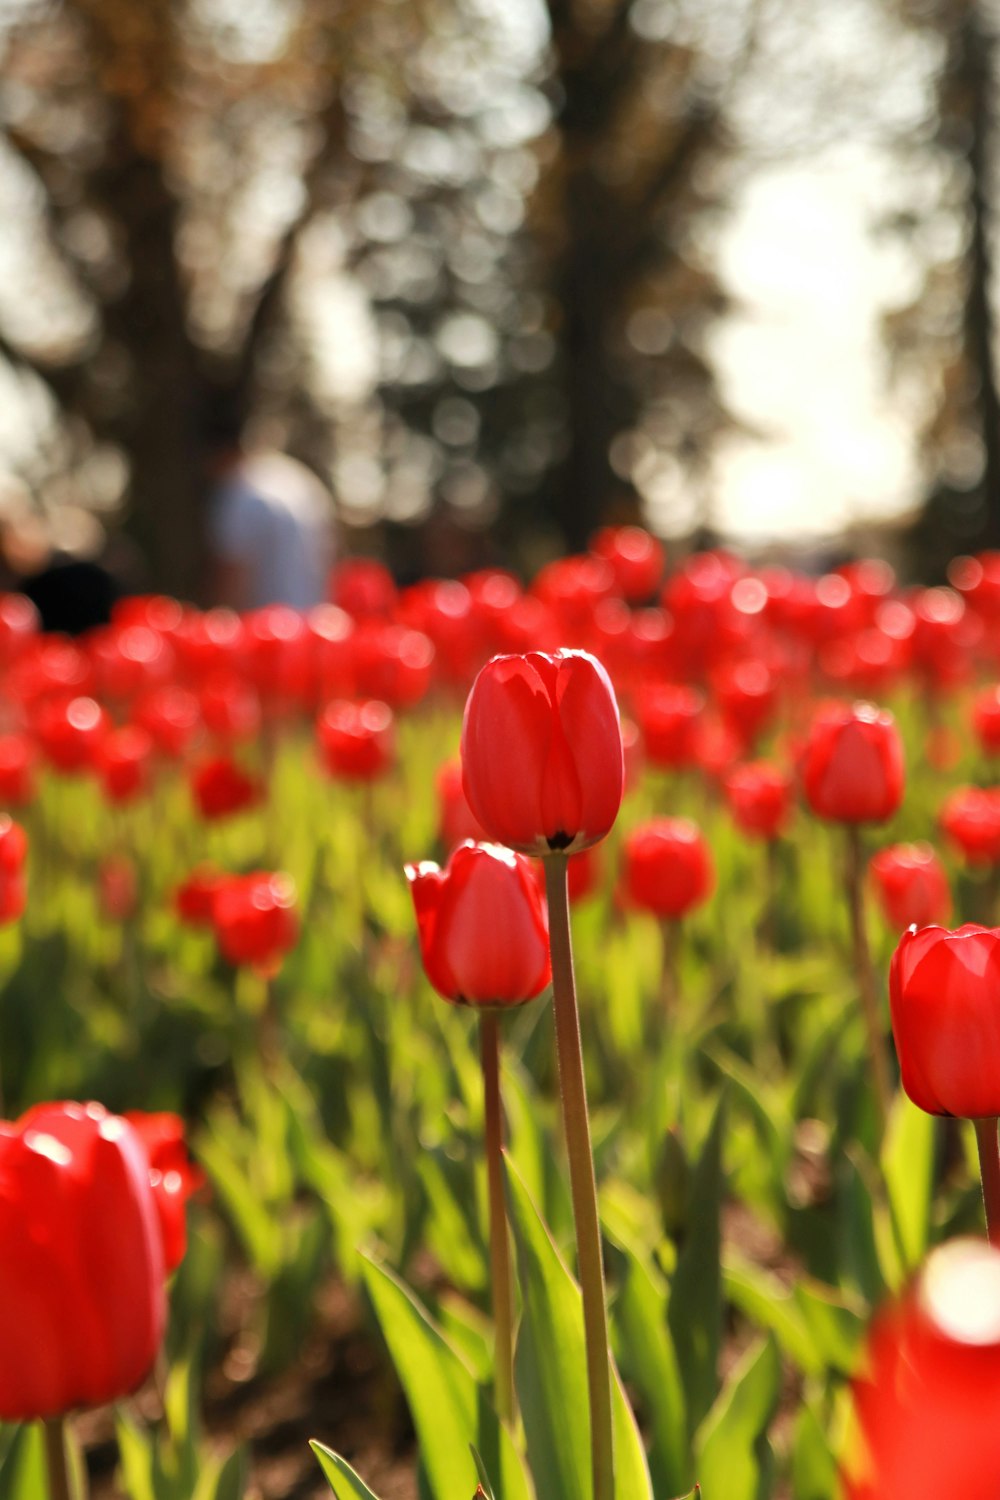 a field of red tulips with people in the background